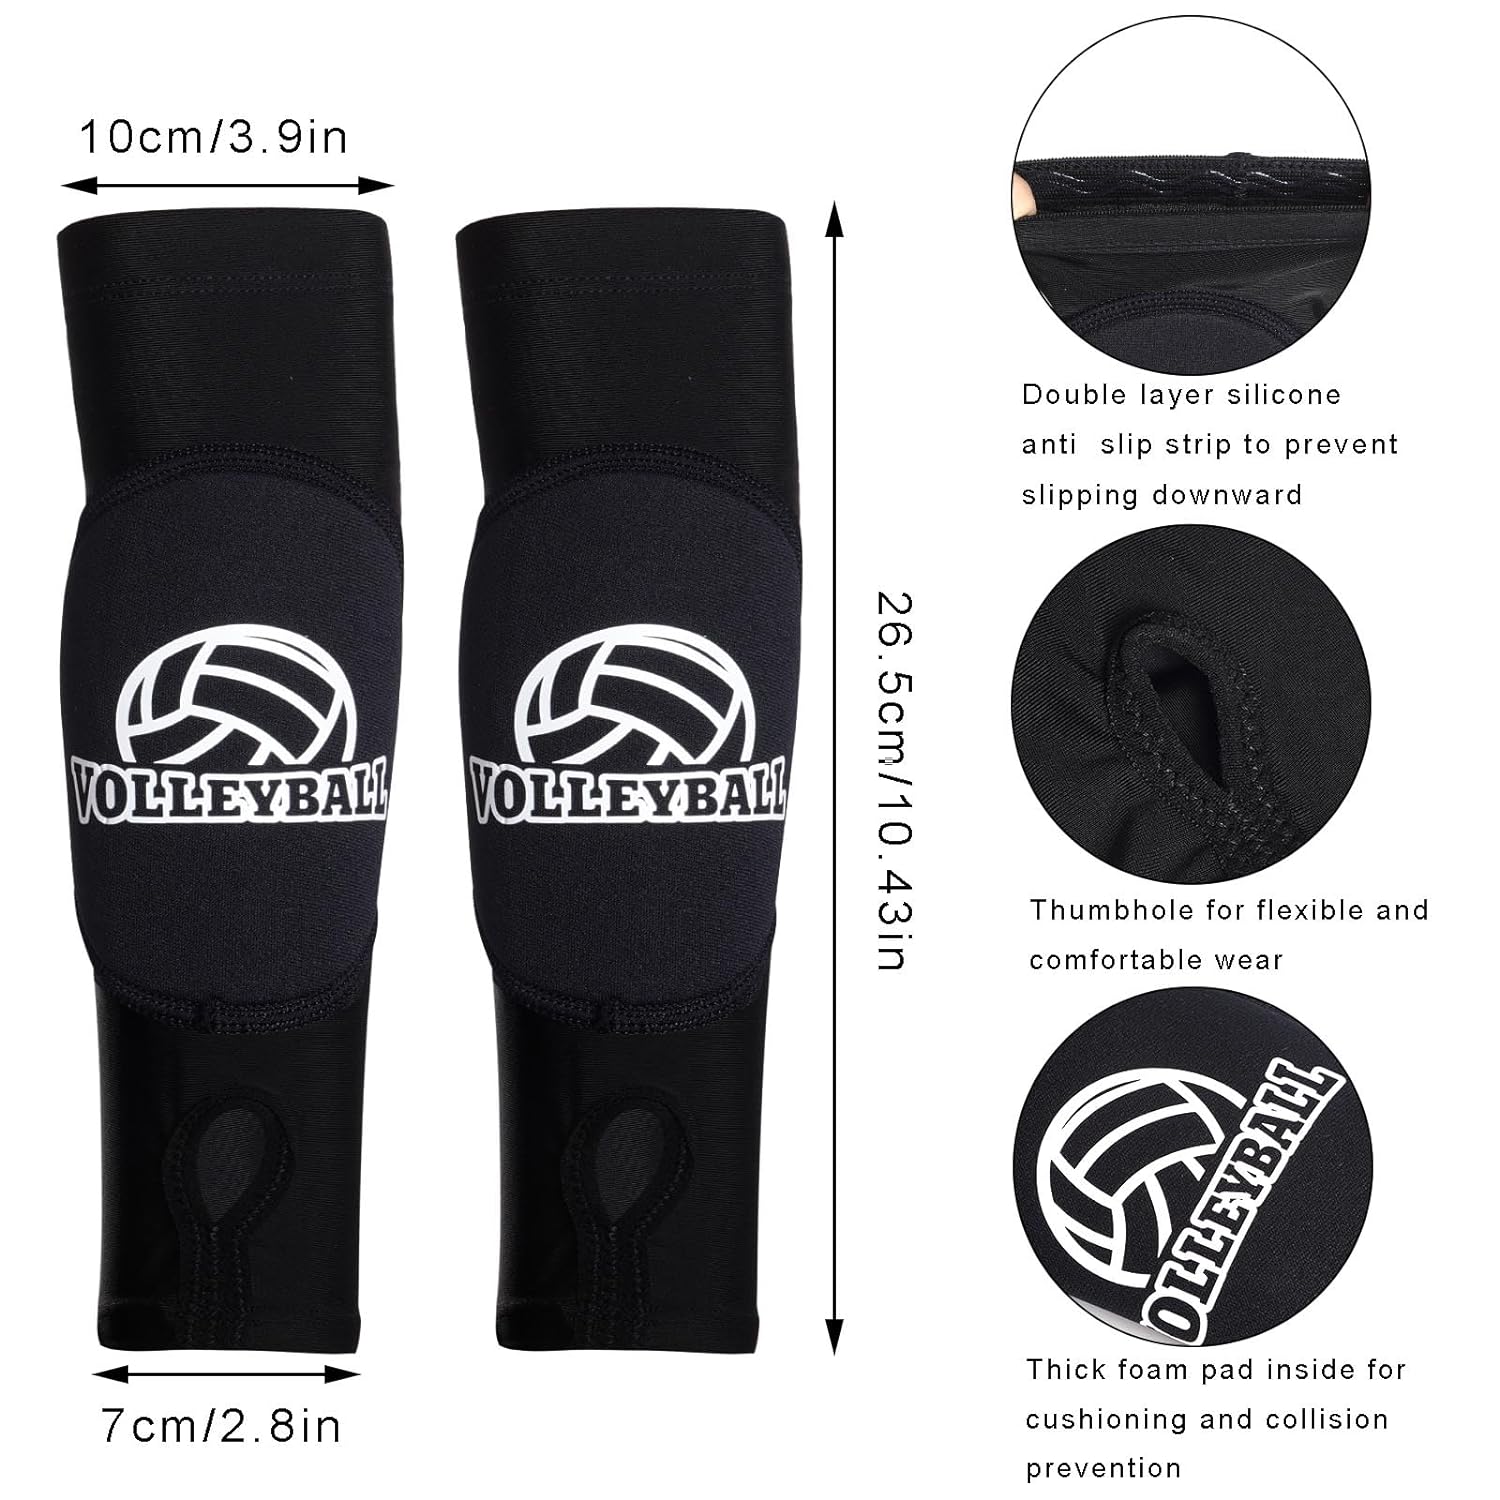 Topbuti 4 Pcs Volleyball Accessories Youth Volleyball Knee Pads Volleyball Arm Sleeves Protection Volleyball Headband Drawstring Bag for Women Teens Girls Boys Training (Style 1)